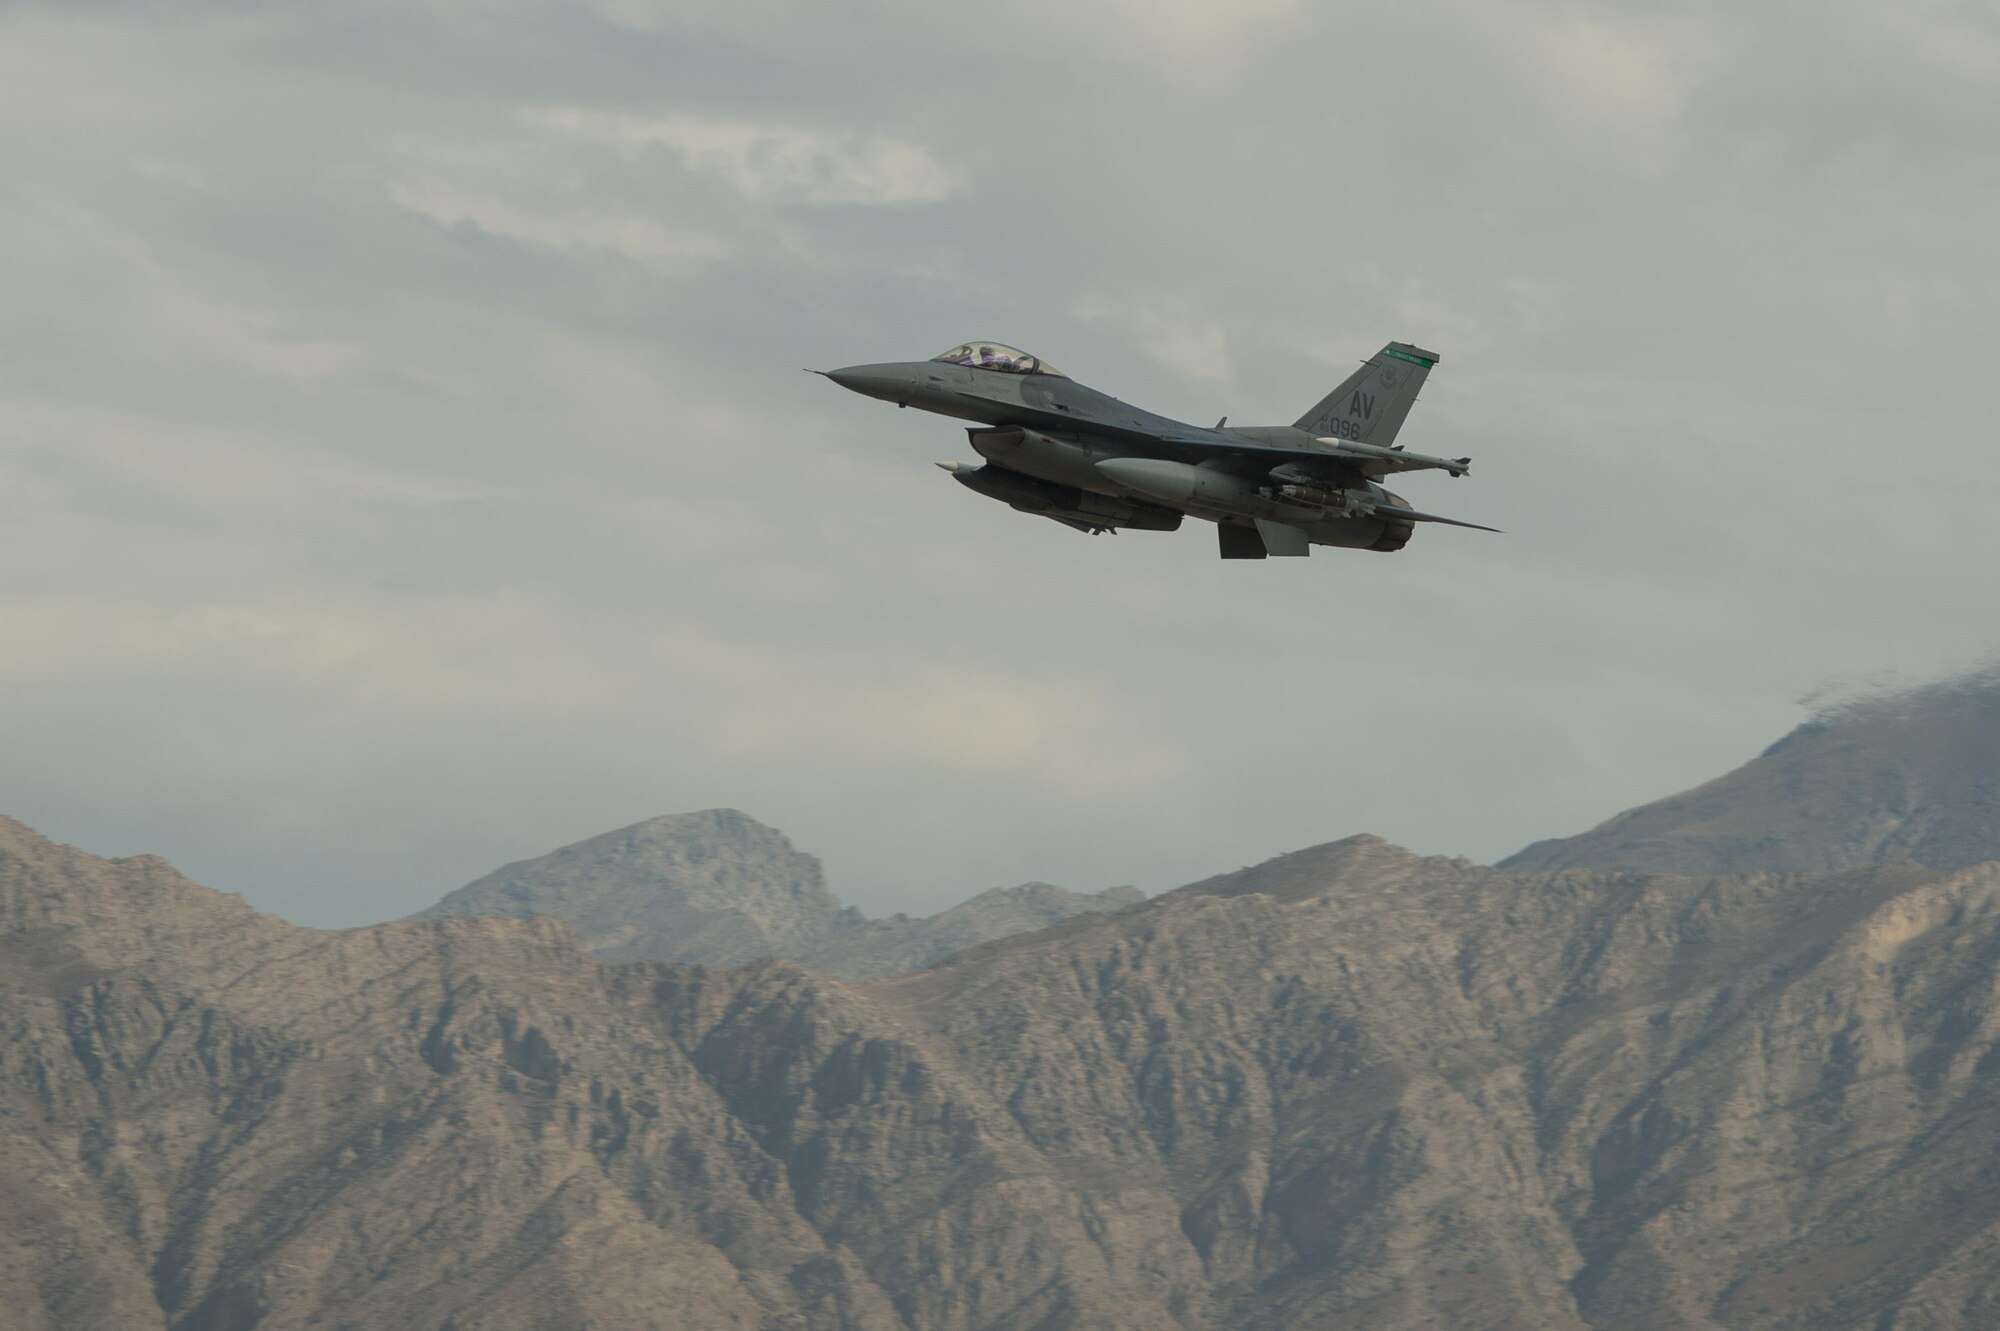 A U.S. Air Force F-16 Fighting Falcon “Triple Nickel” aircraft assigned to the 555th Expeditionary Fighter Squadron from Aviano Air Base, Italy, takes off from Bagram Airfield, Afghanistan, July 28, 2015. The F-16 is a multi-role fighter aircraft that is highly maneuverable and has proven itself in air-to-air and air-to-ground combat. Members of the Triple Nickel are deployed in support of Operation Freedom’s Sentinel and NATO’s Resolute Support mission. (U.S. Air Force photo by Tech. Sgt. Joseph Swafford/Released)